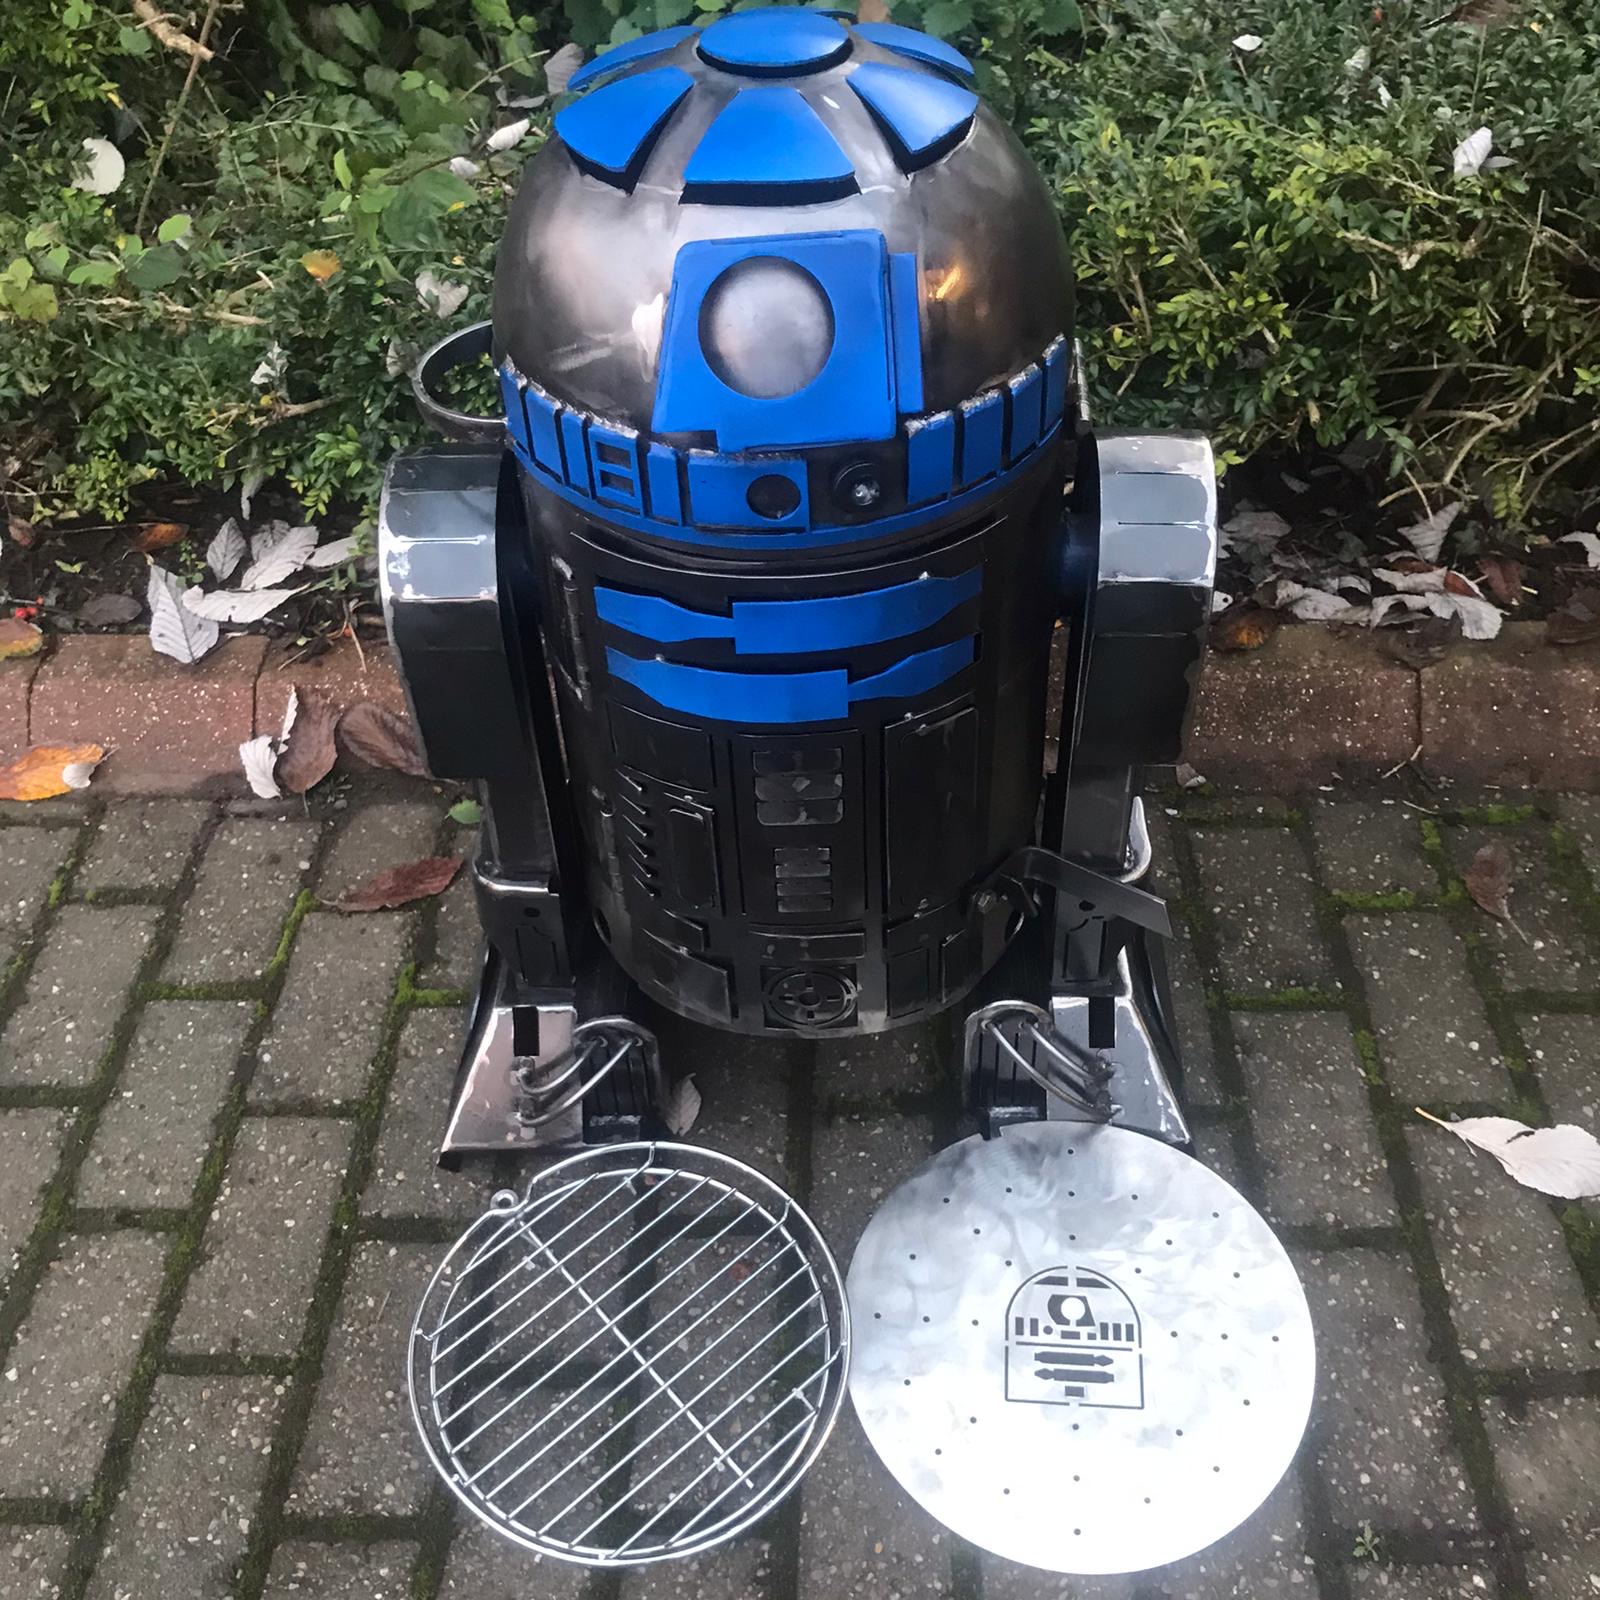 Star Wars R2D2 Wood Burner and Pizza Oven